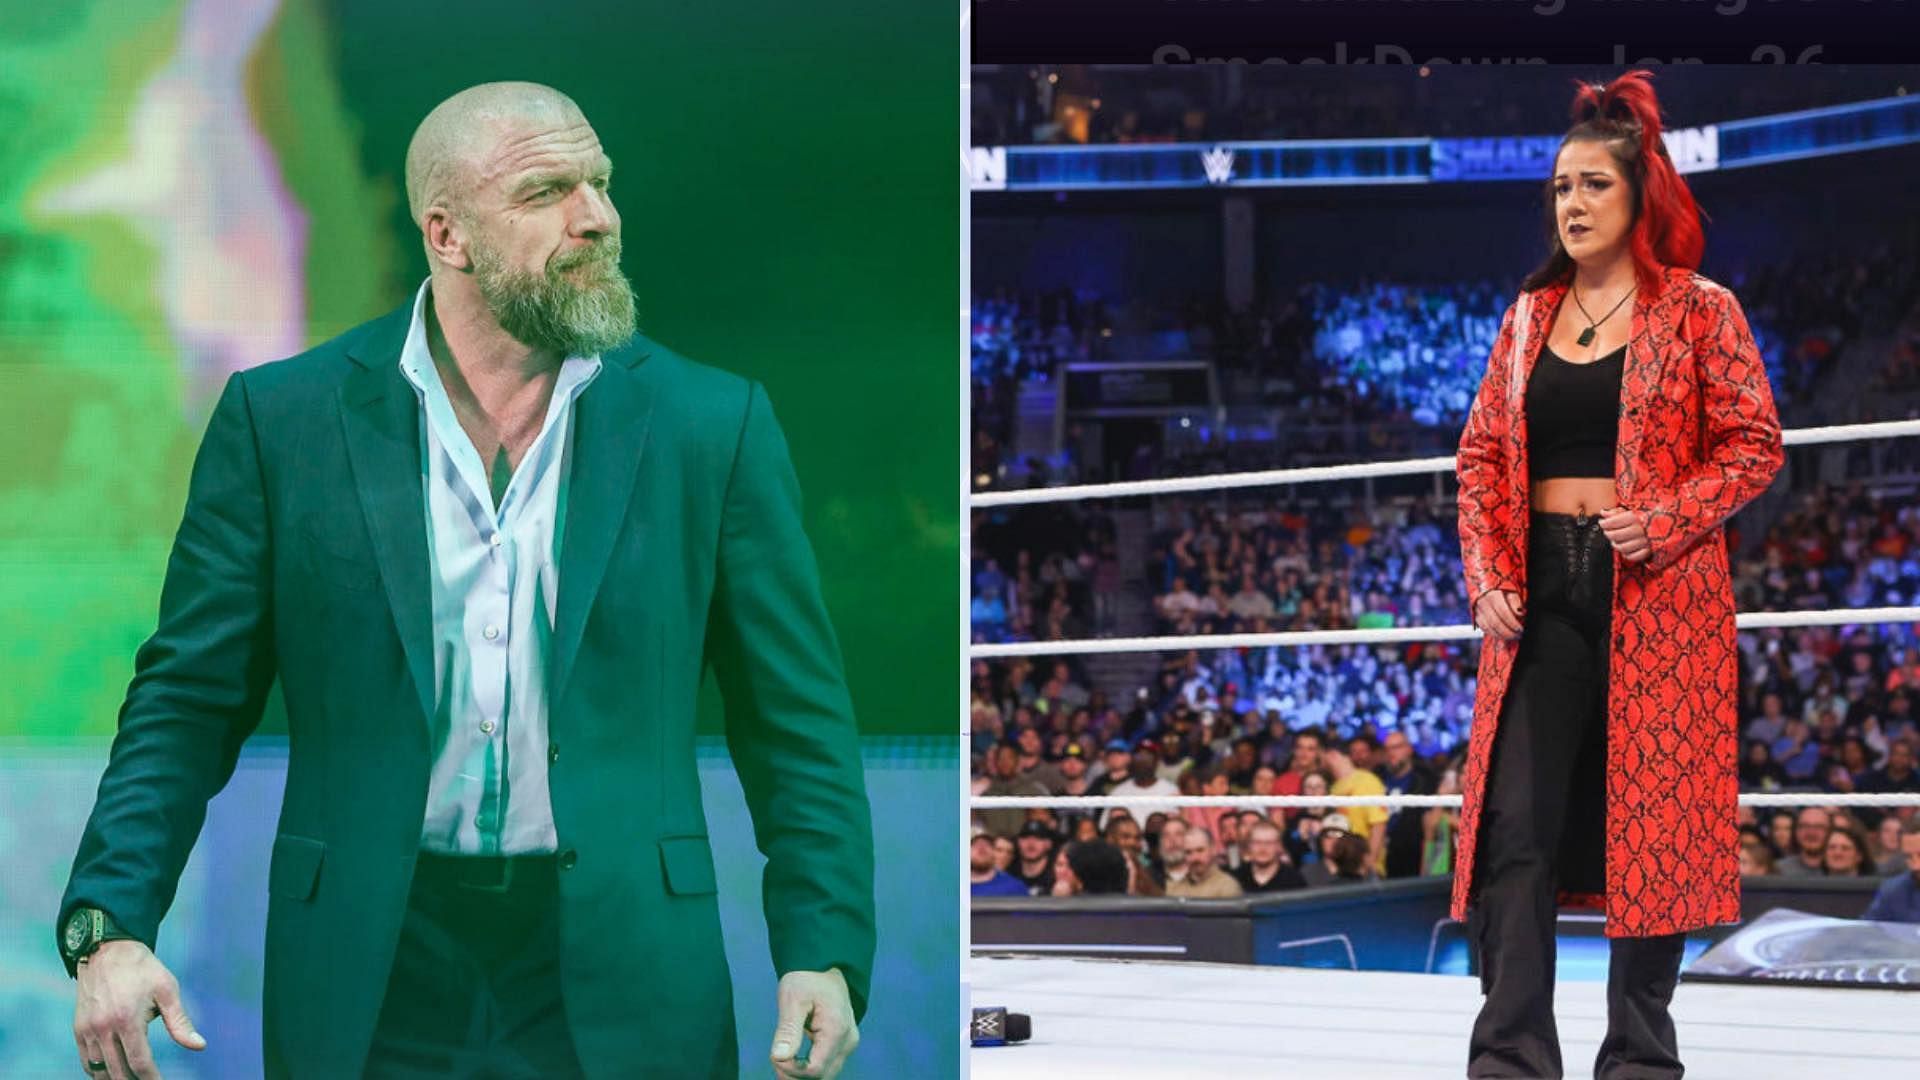 Triple H and Bayley appeared on SmackDown this week.